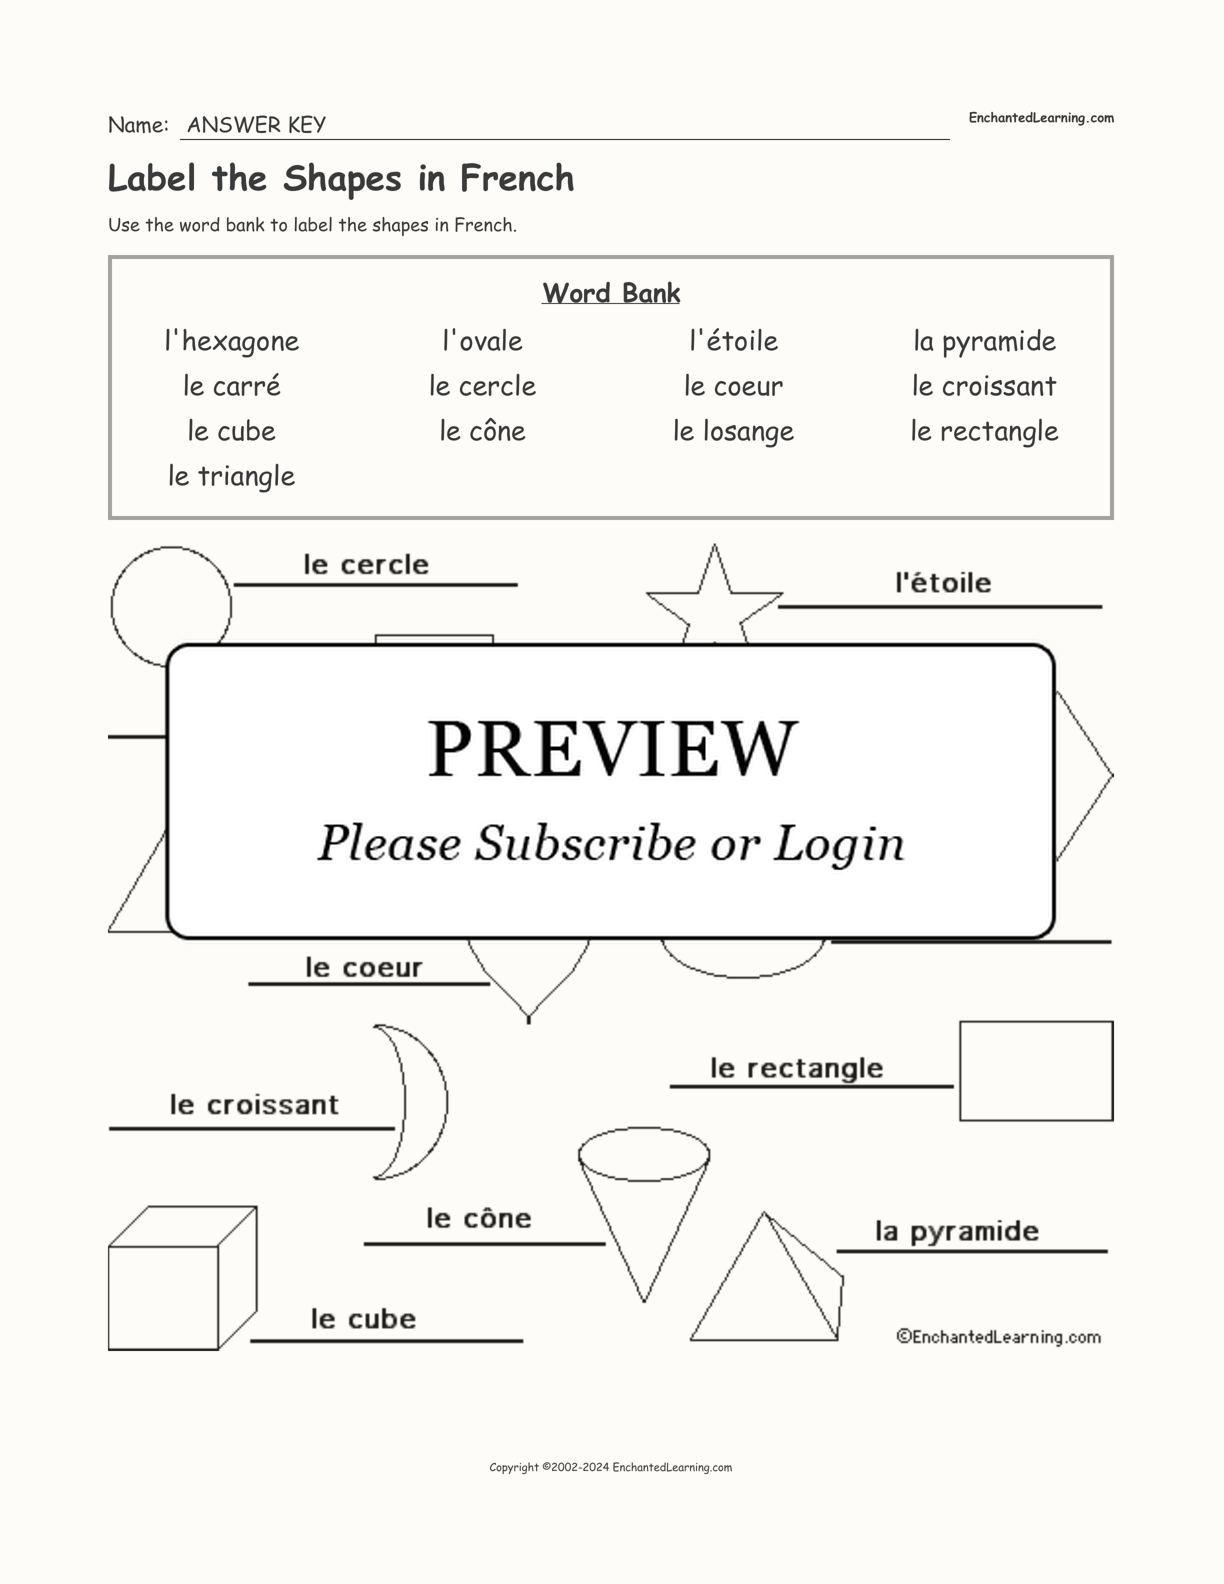 Label the Shapes in French interactive worksheet page 2